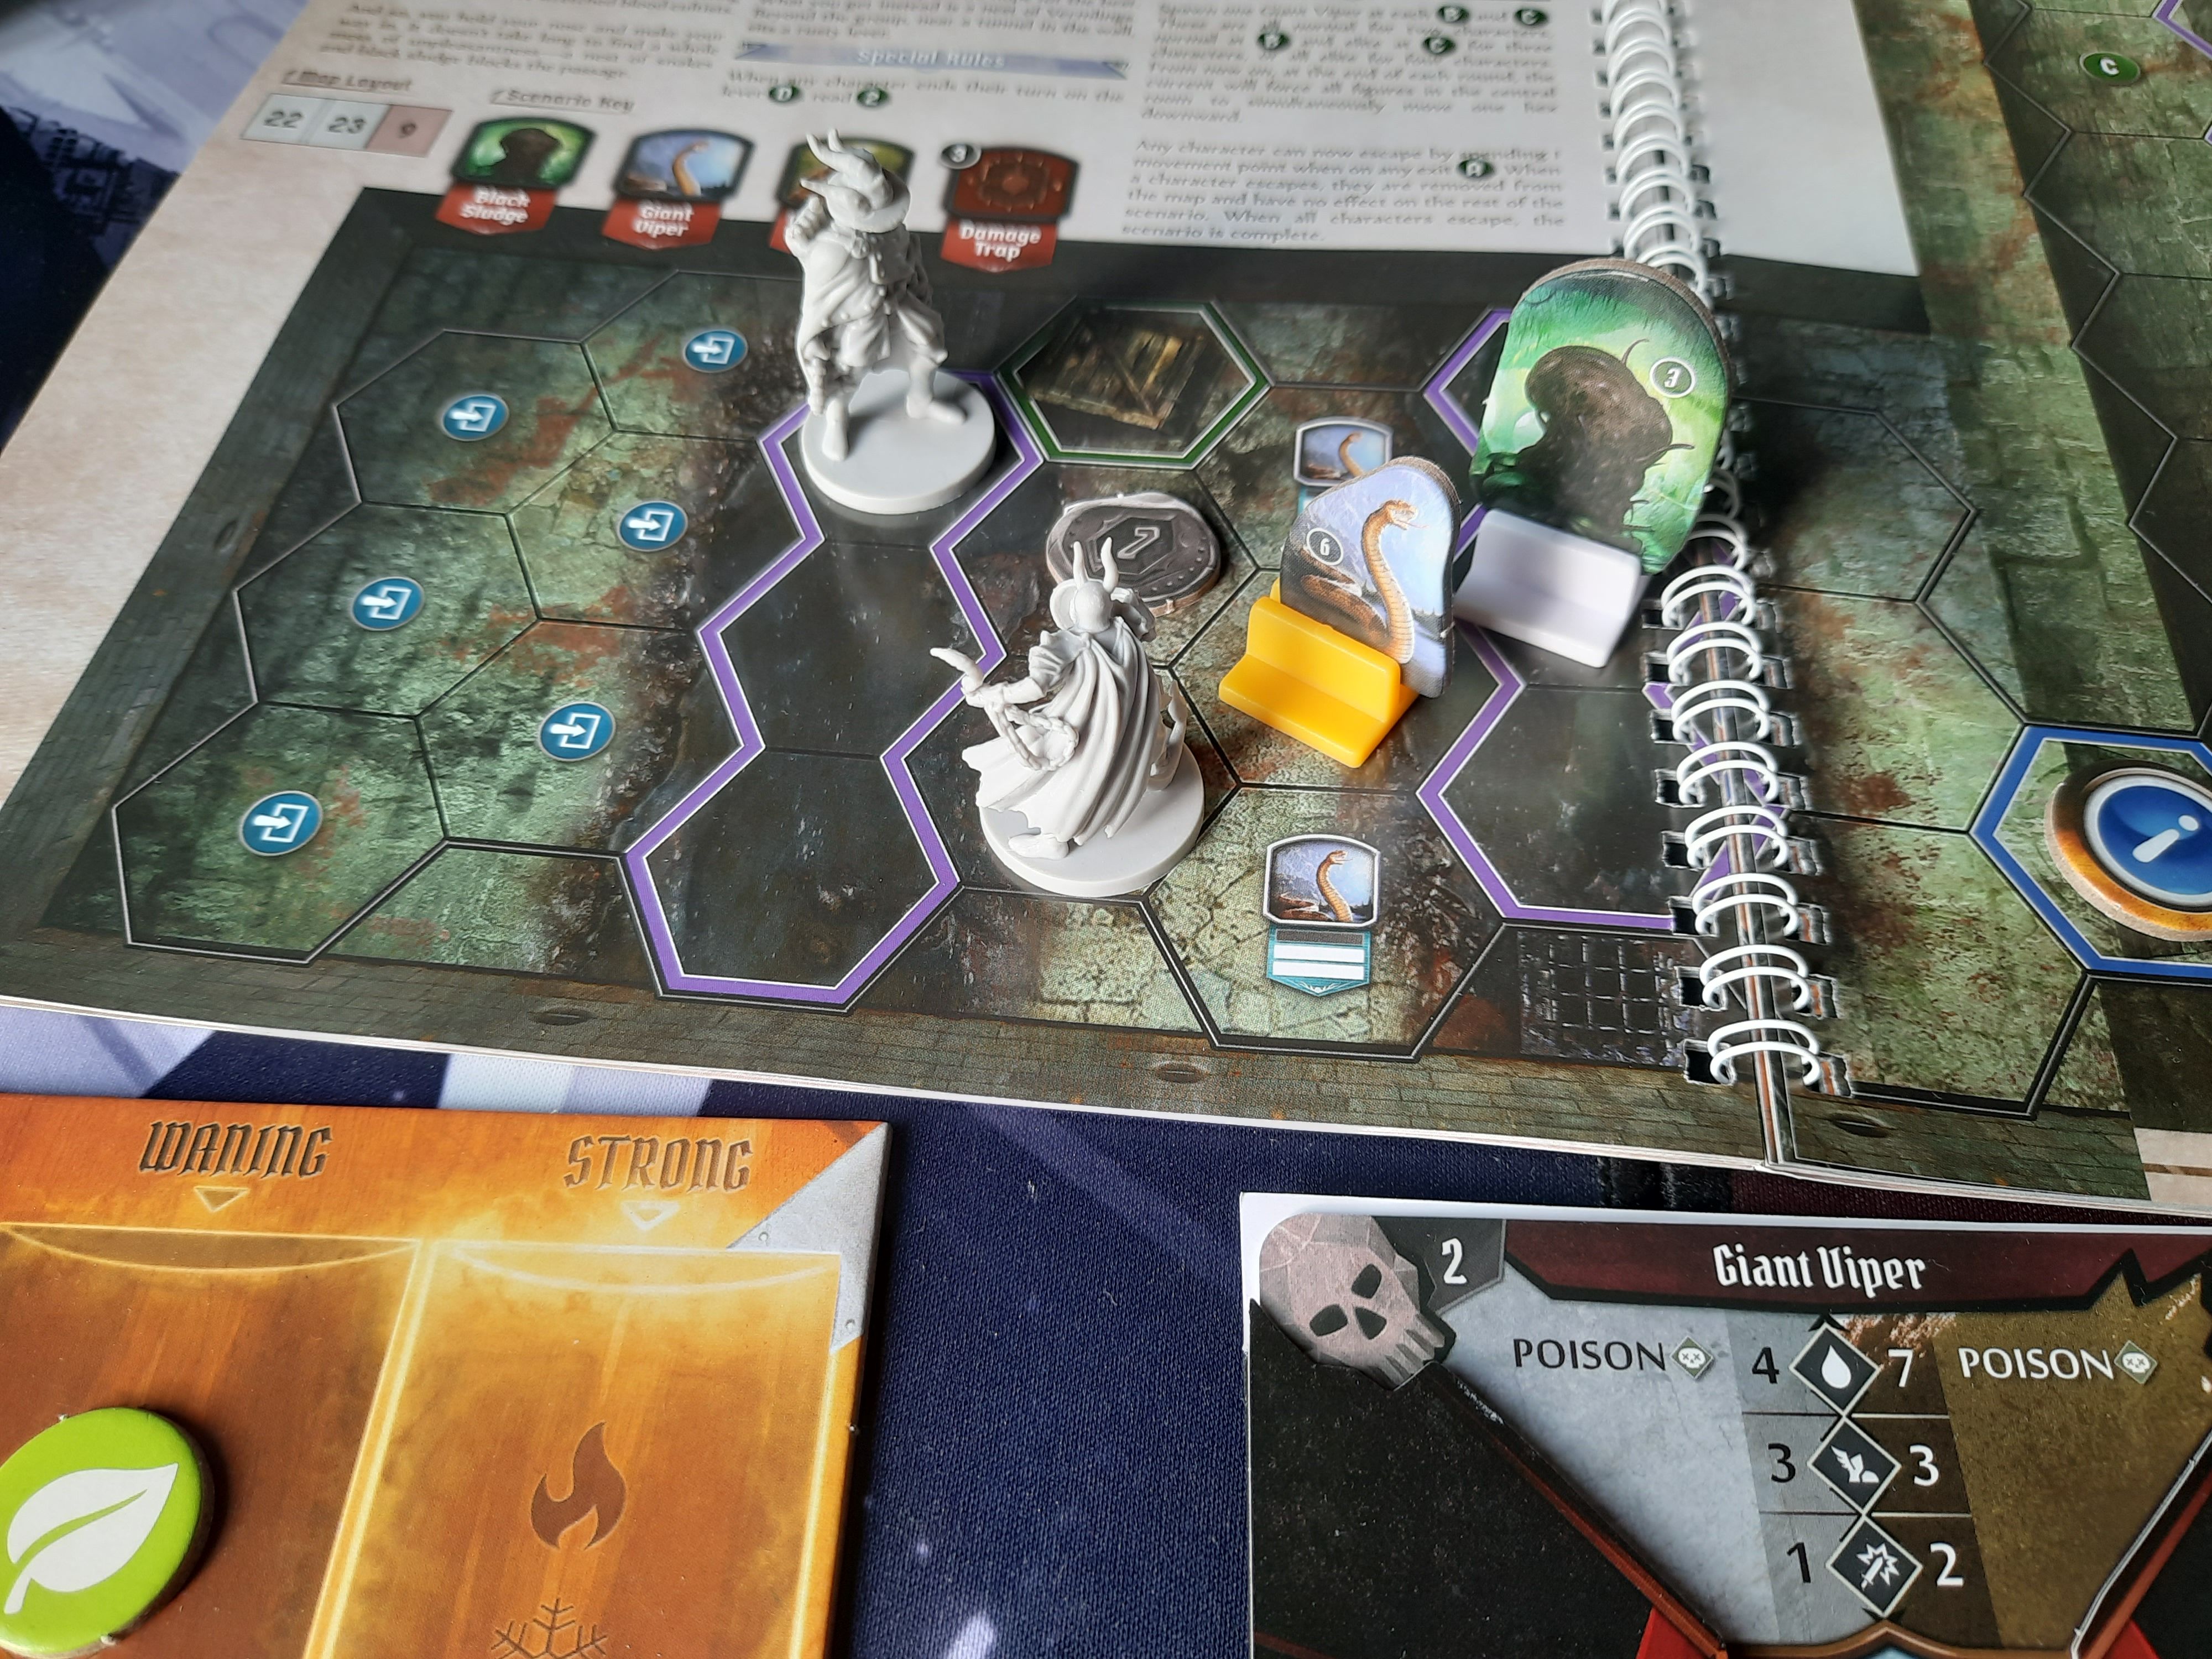 Gloomhaven: Jaws of the Lion makes the megahit more accessible